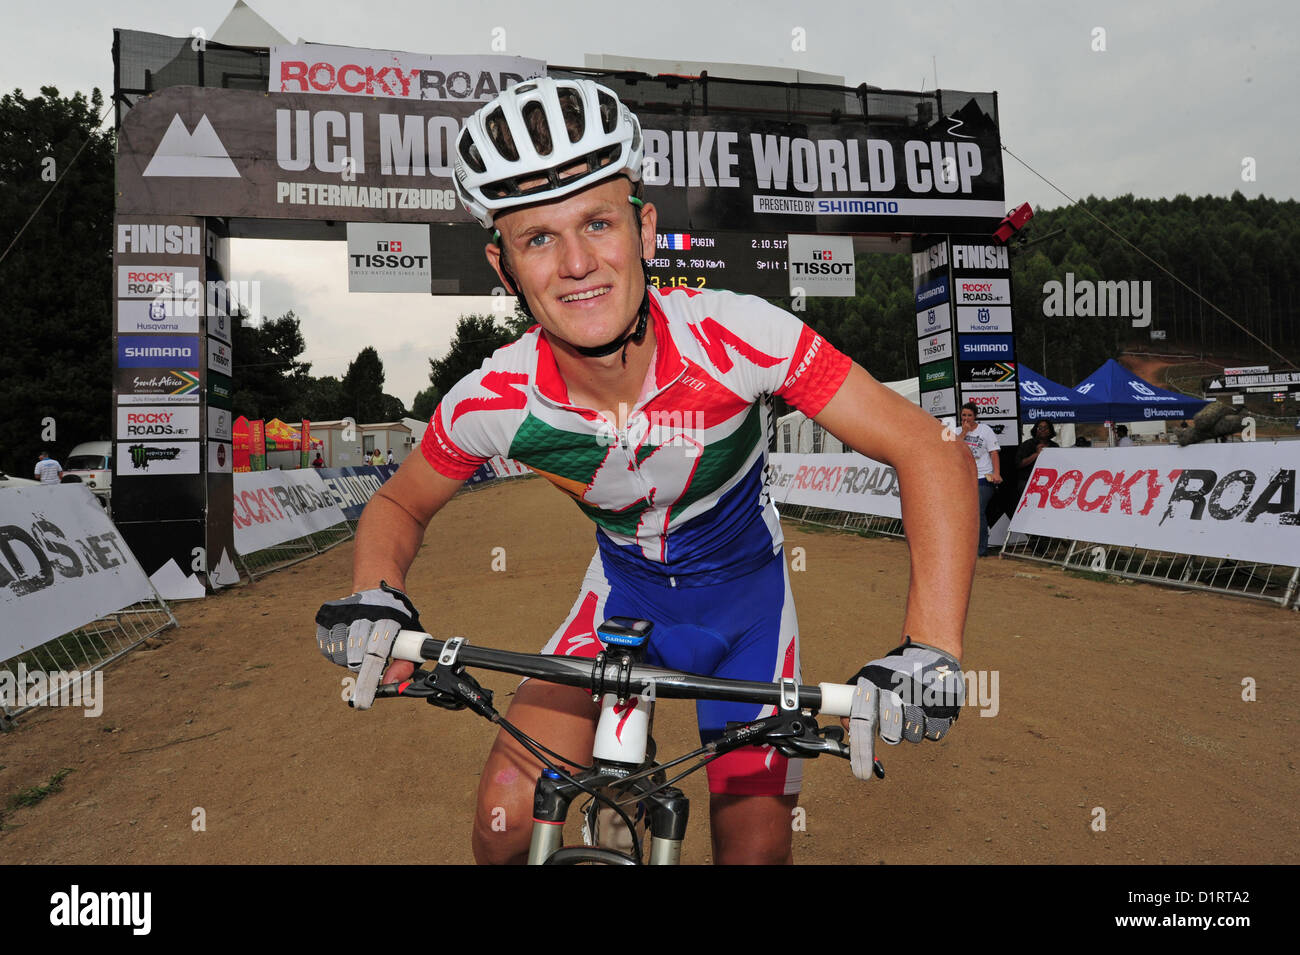 PIETERMARITZBURG, SOUTH AFRICA: Local hopeful and National Champion Burry Stander at the finish line ahead of the Rockyroads UCI Mountain Bike World Cup on March 17, 2012 in Pietermaritzburg, South Africa. (Photo by Gallo Images / Natal Witness / Ian Carbutt) Stock Photo